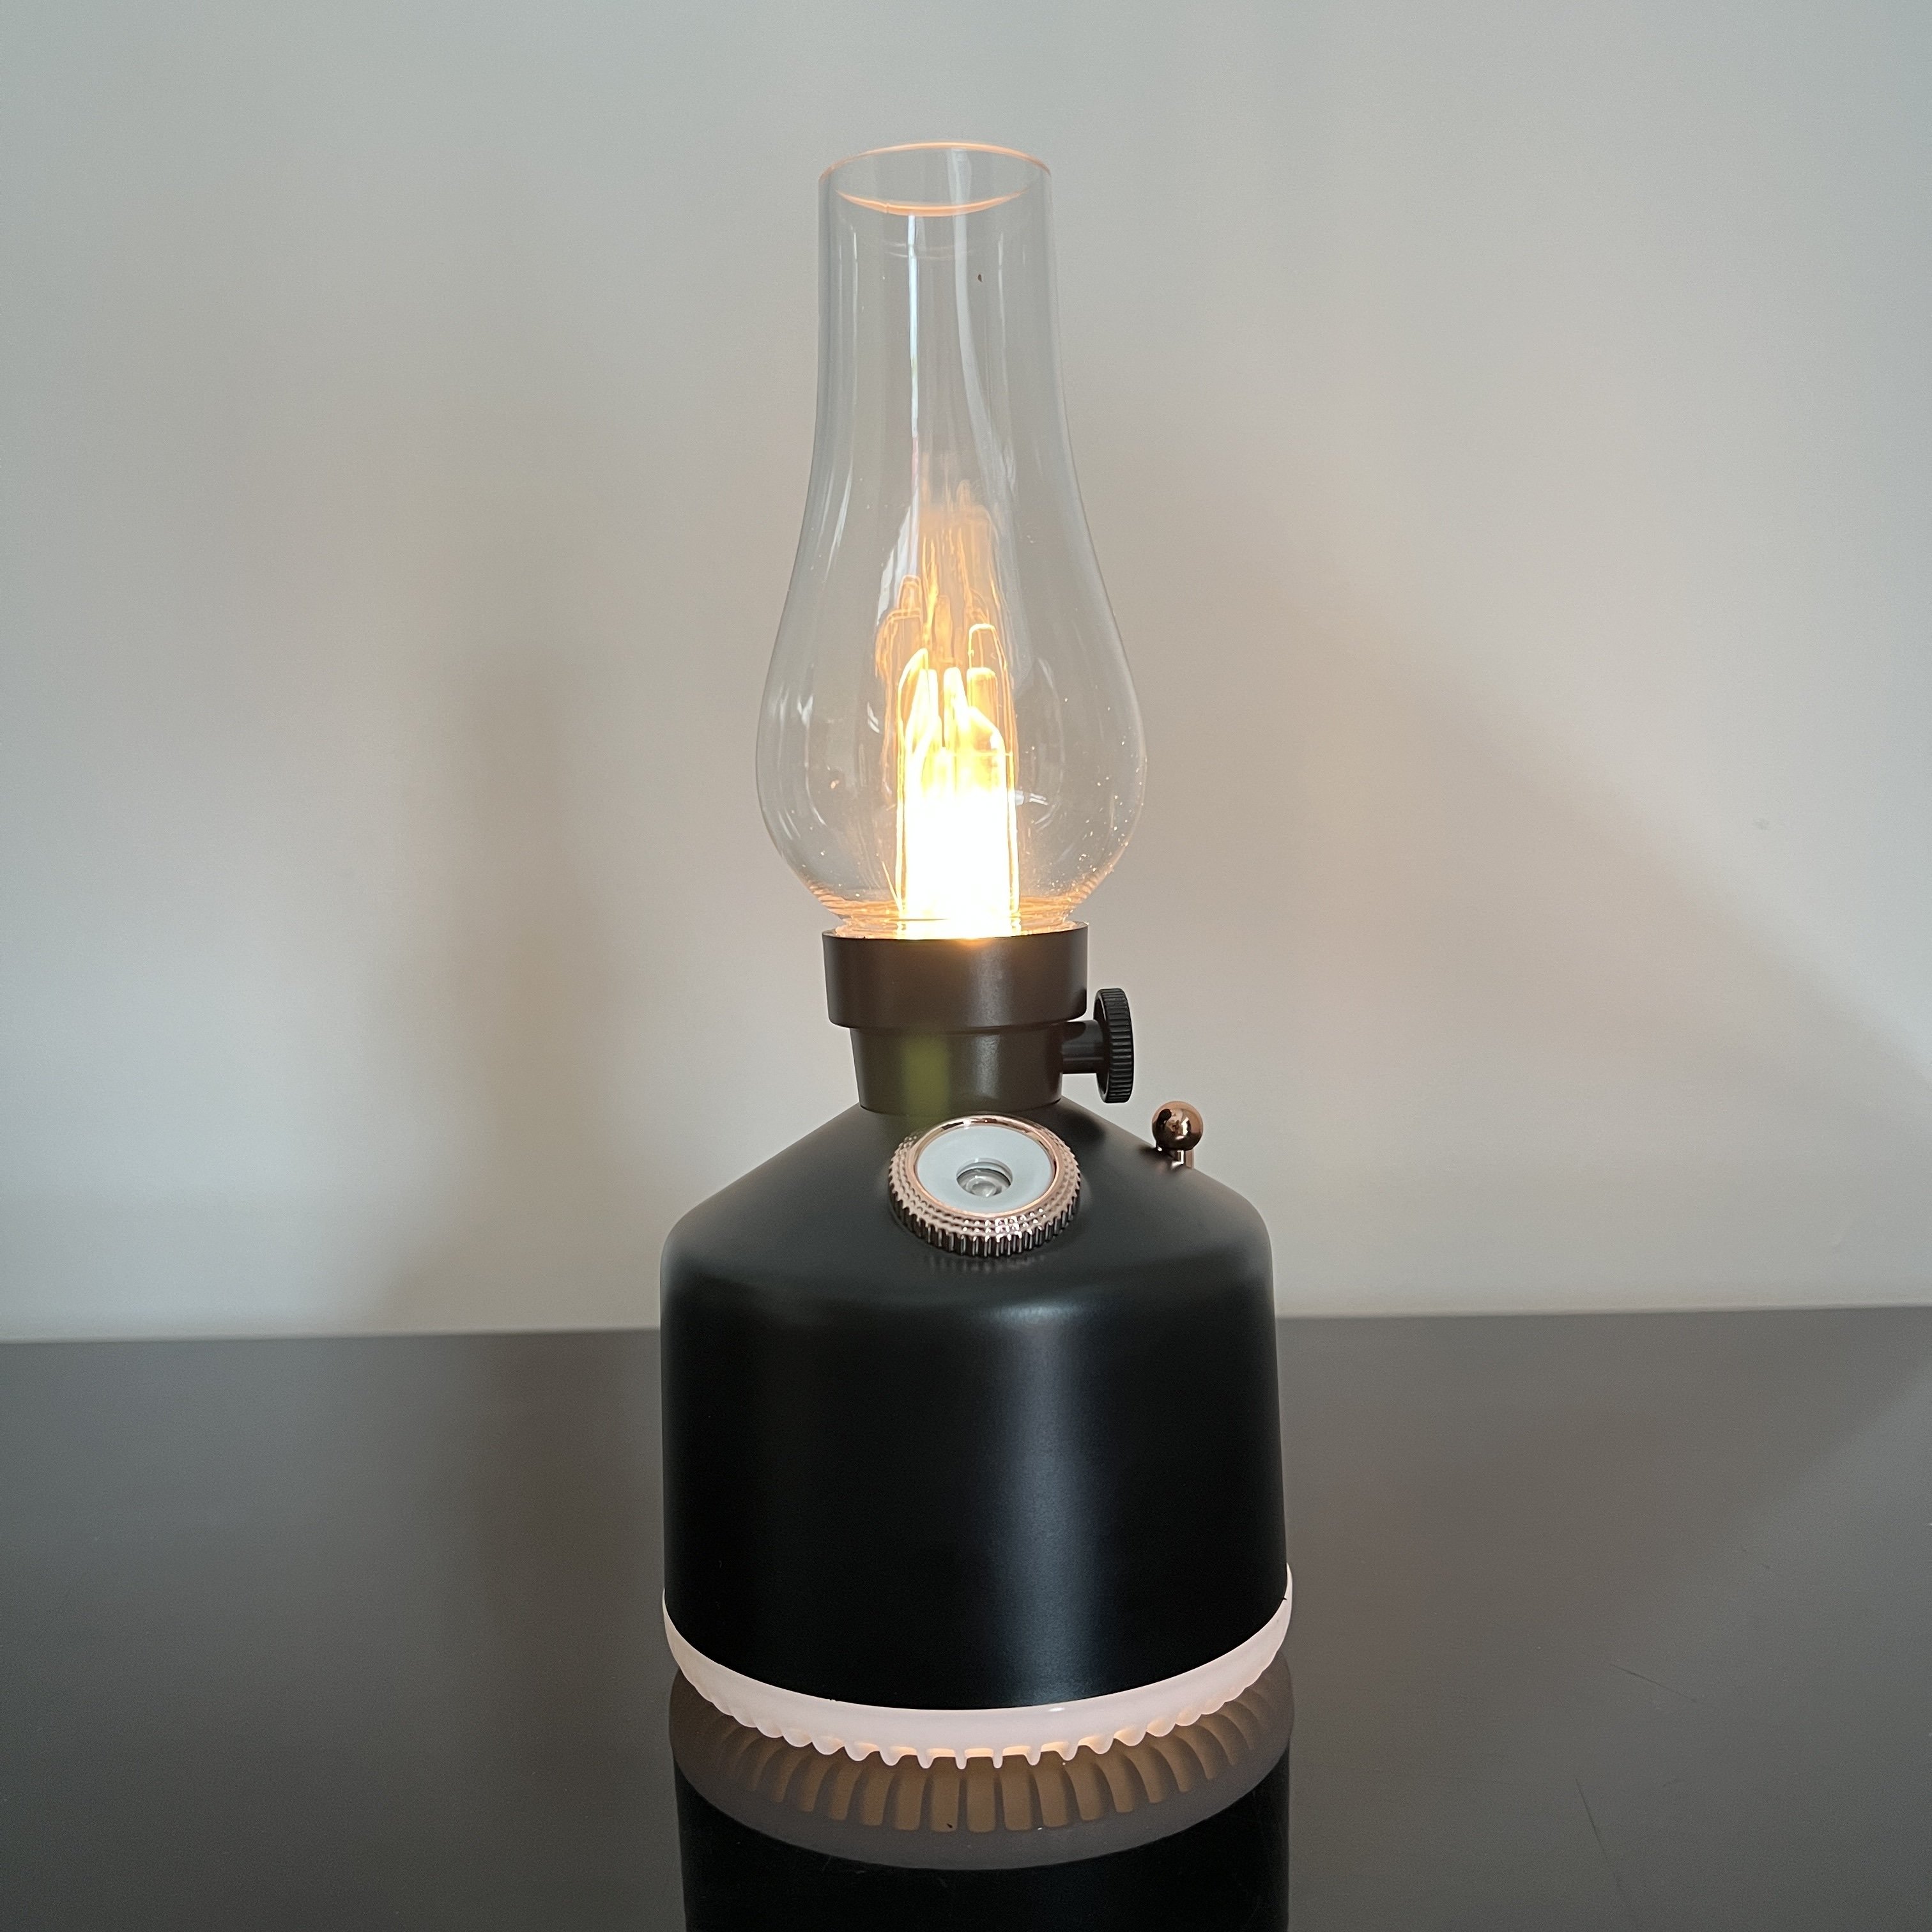 Vintage Lantern Diffuser Usb Rechargeable And Portable